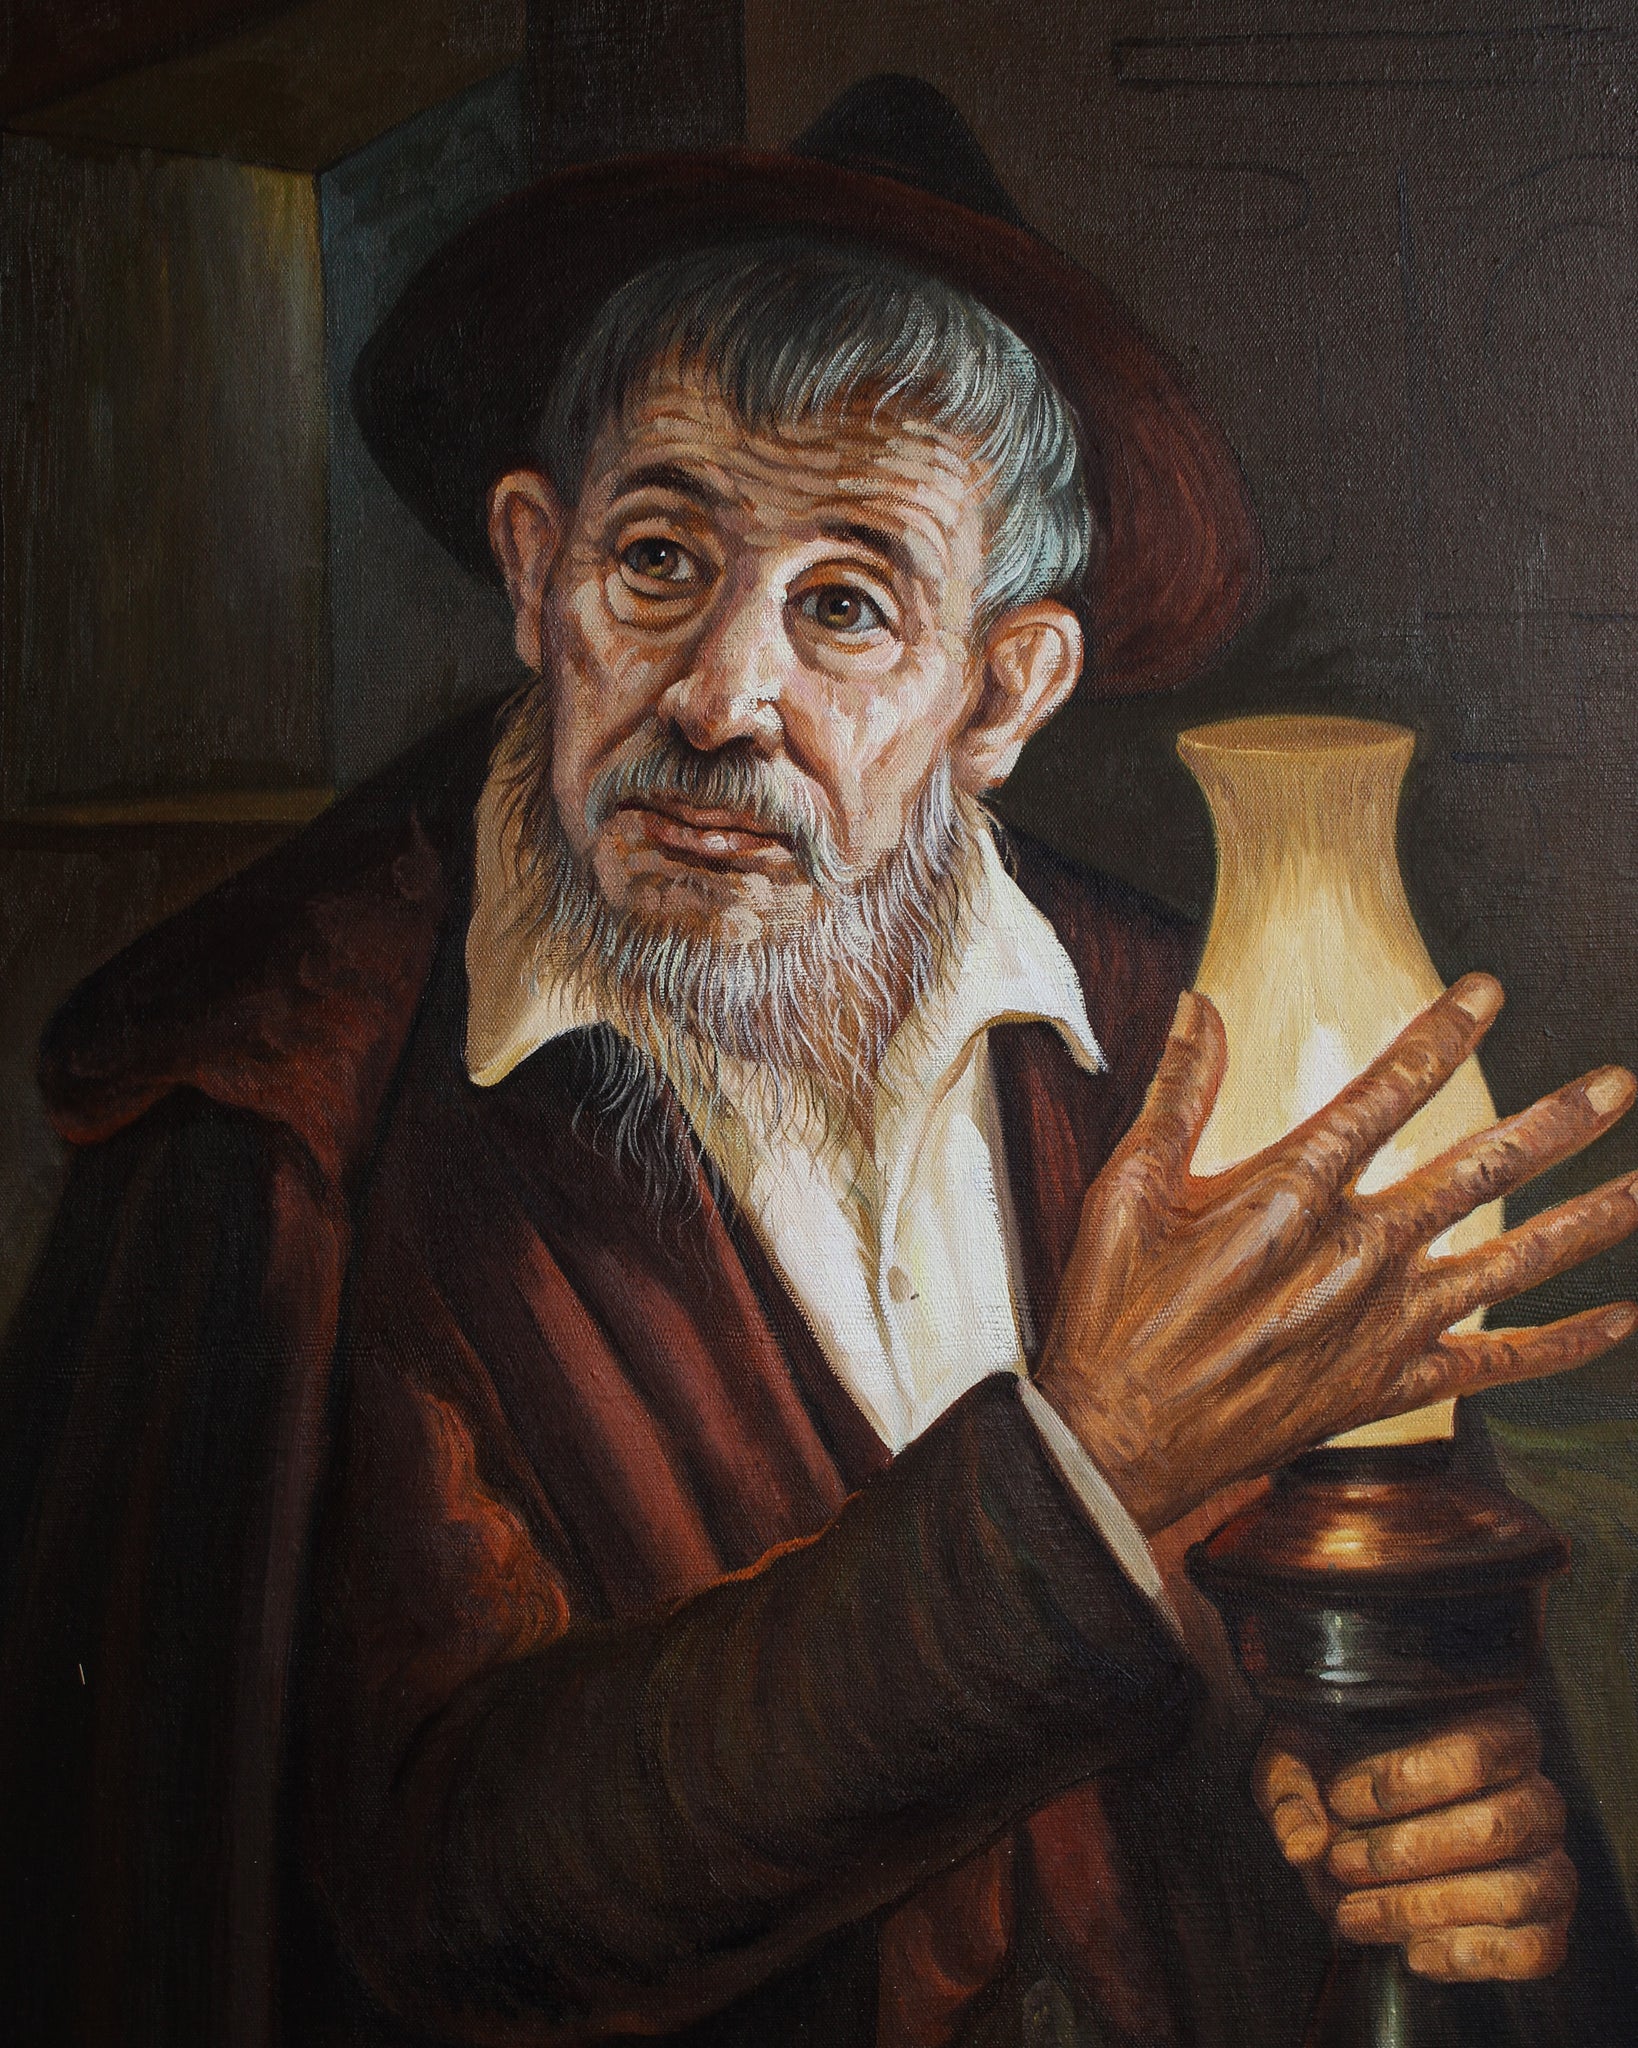 Man with Oil Lamp, Oil on Canvas